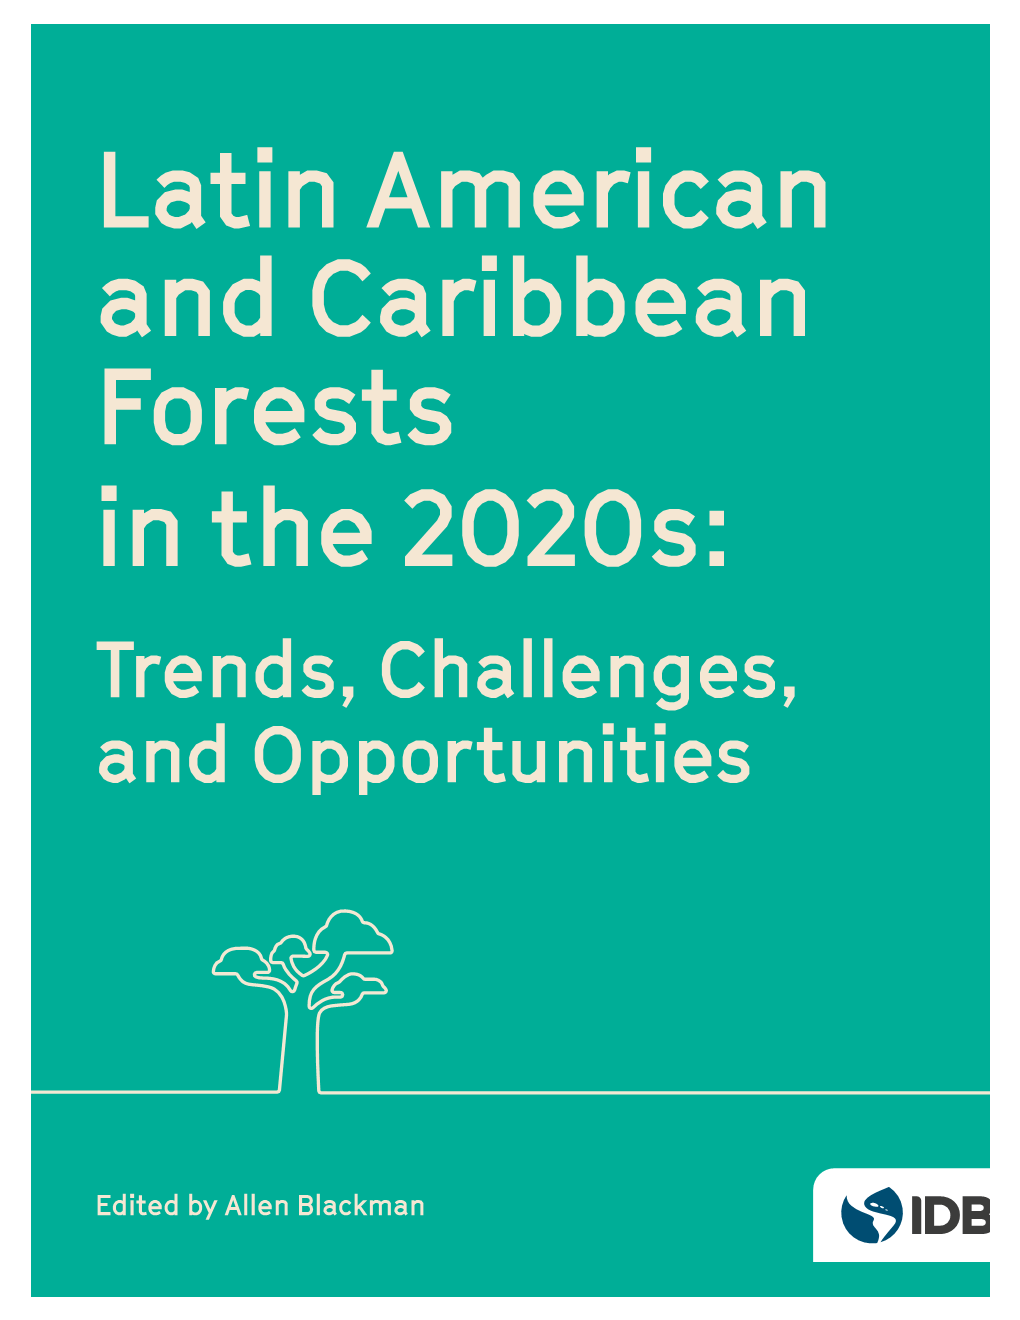 Latin American and Caribbean Forests in the 2020S: Trends, Challenges, and Opportunities